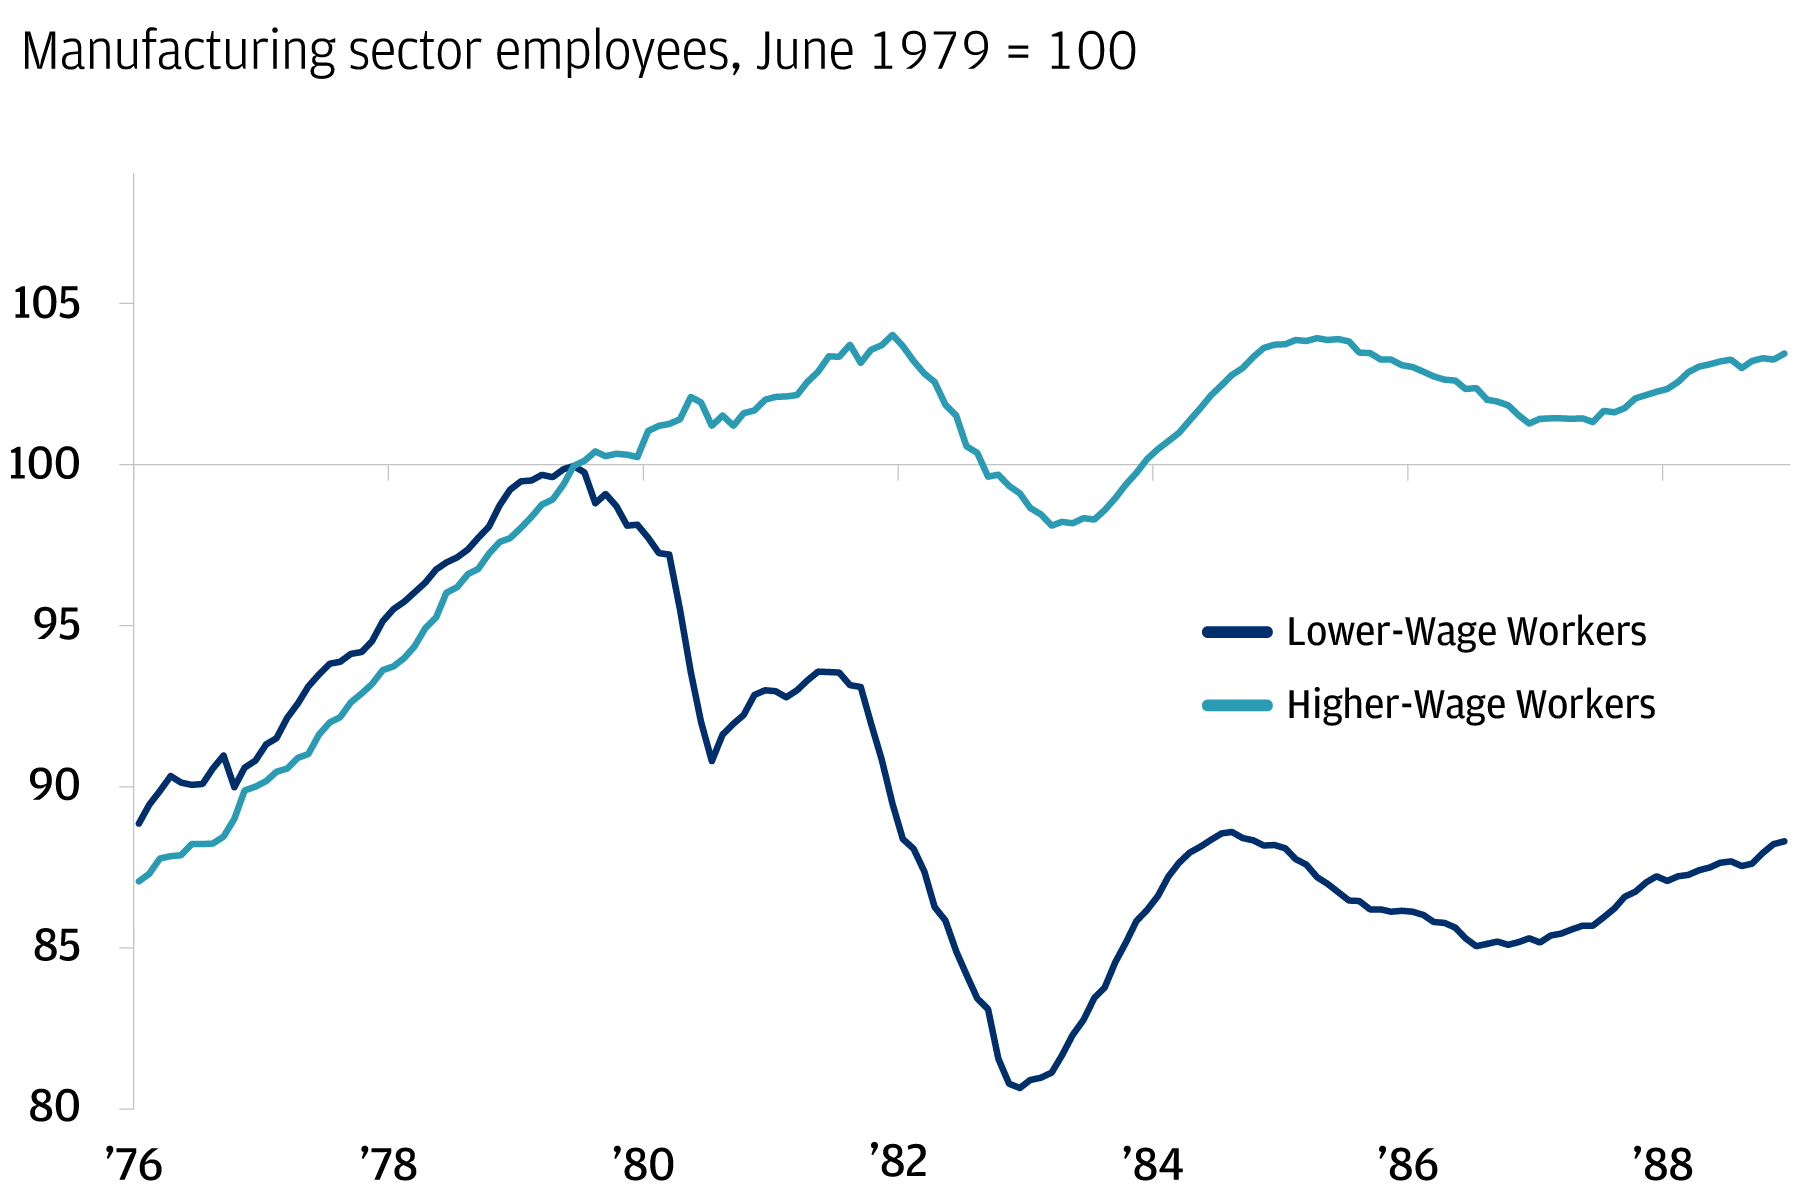 The chart shows the index of manufacturing employees since 1976.